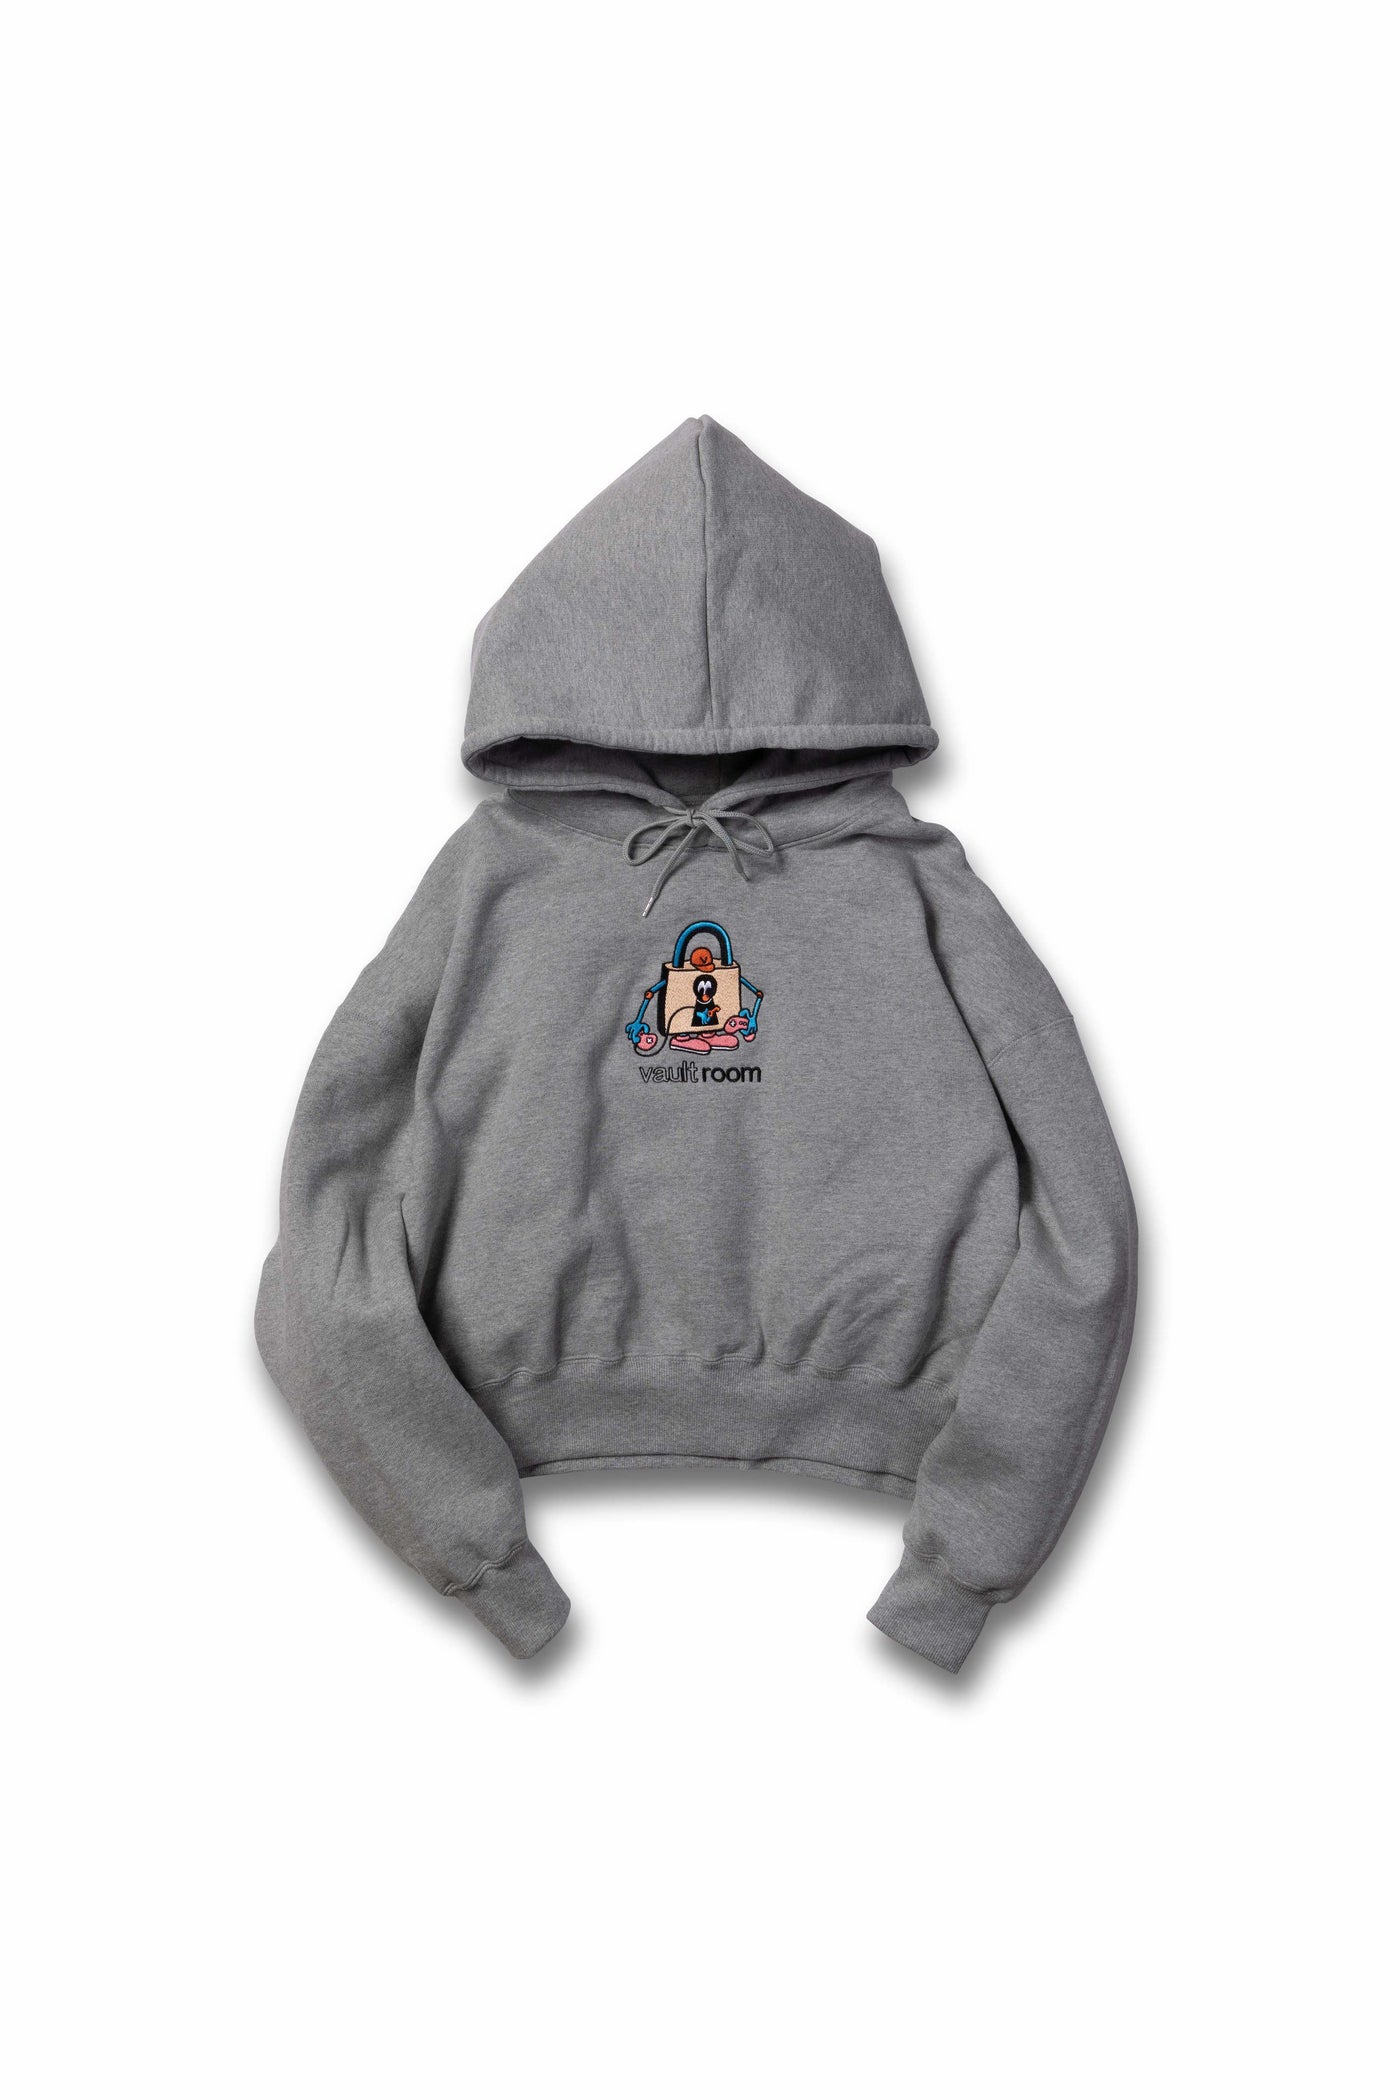 cotton100%VAULTROOM LOGO WOMENS CROPPED HOODIE